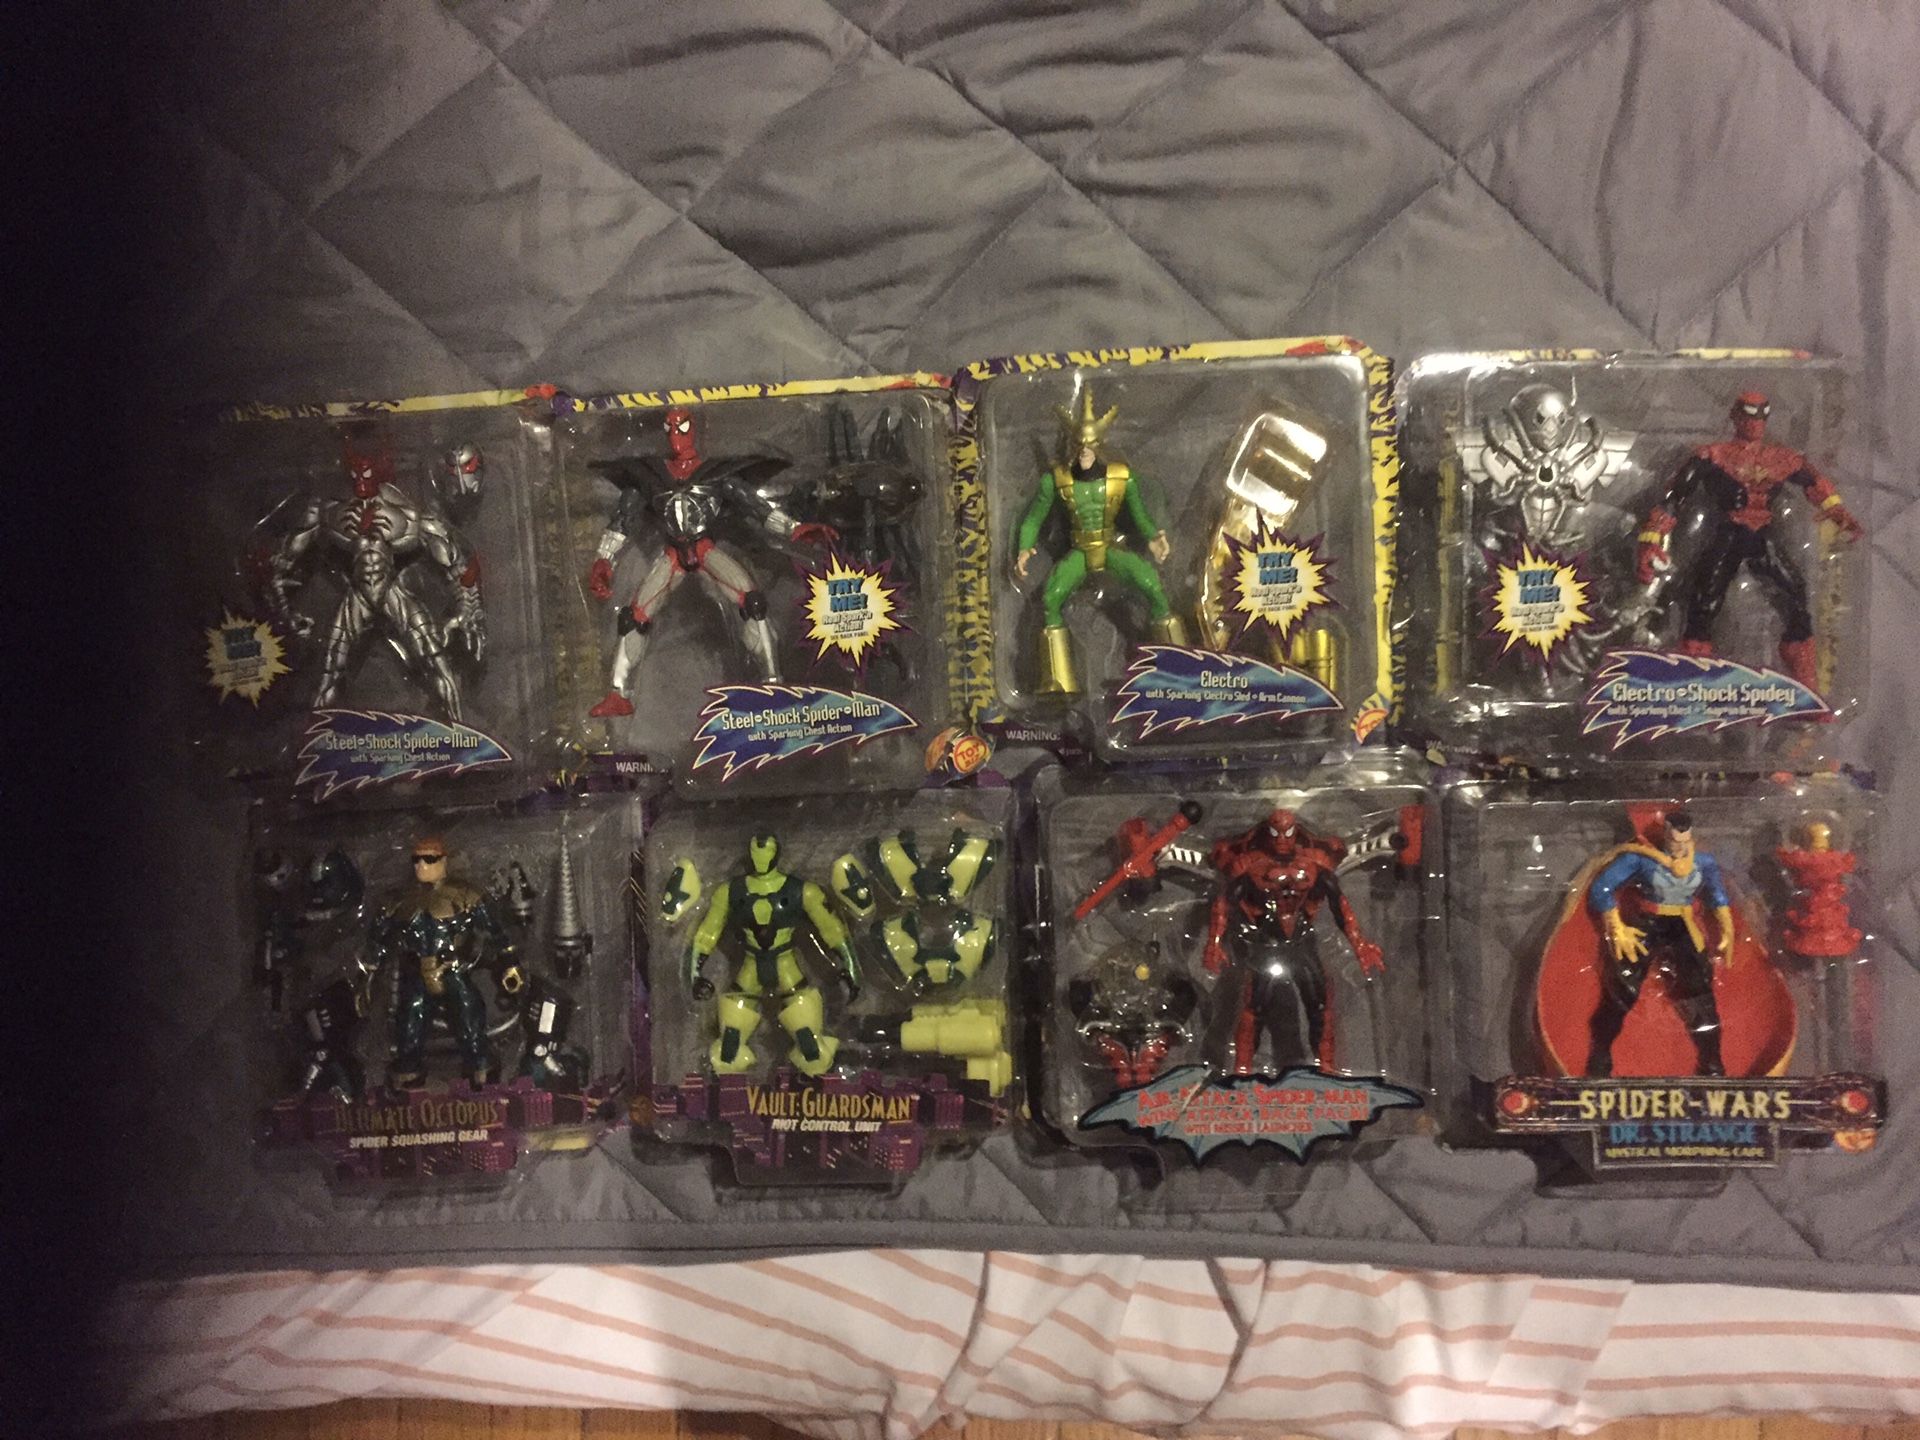 Toybiz Spiderman The Animated Series Lot of 8 Action Figures, Used In Bubble